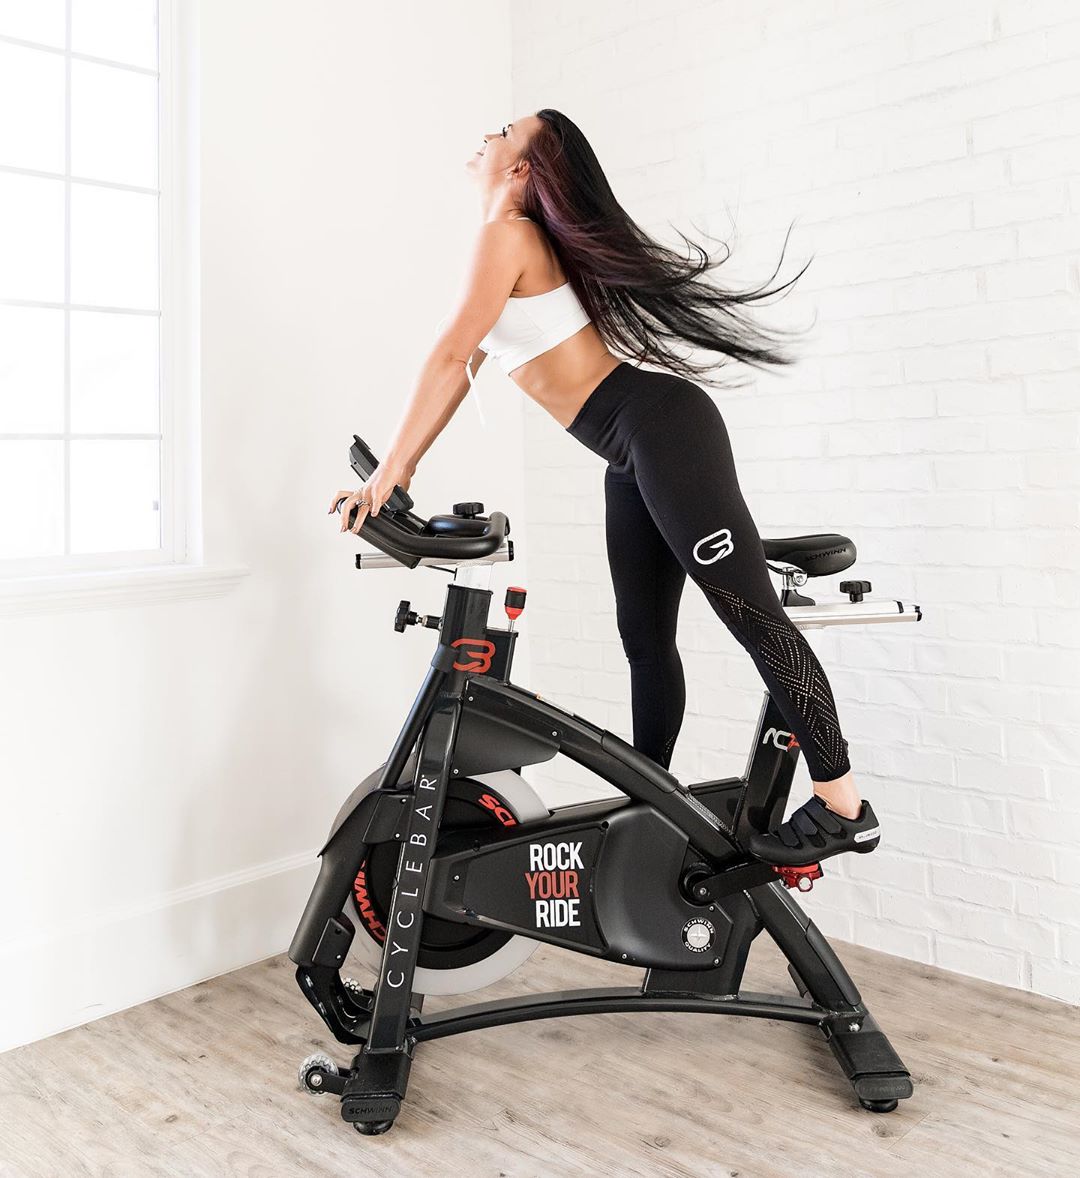 Reap the benefits of CycleBar at home